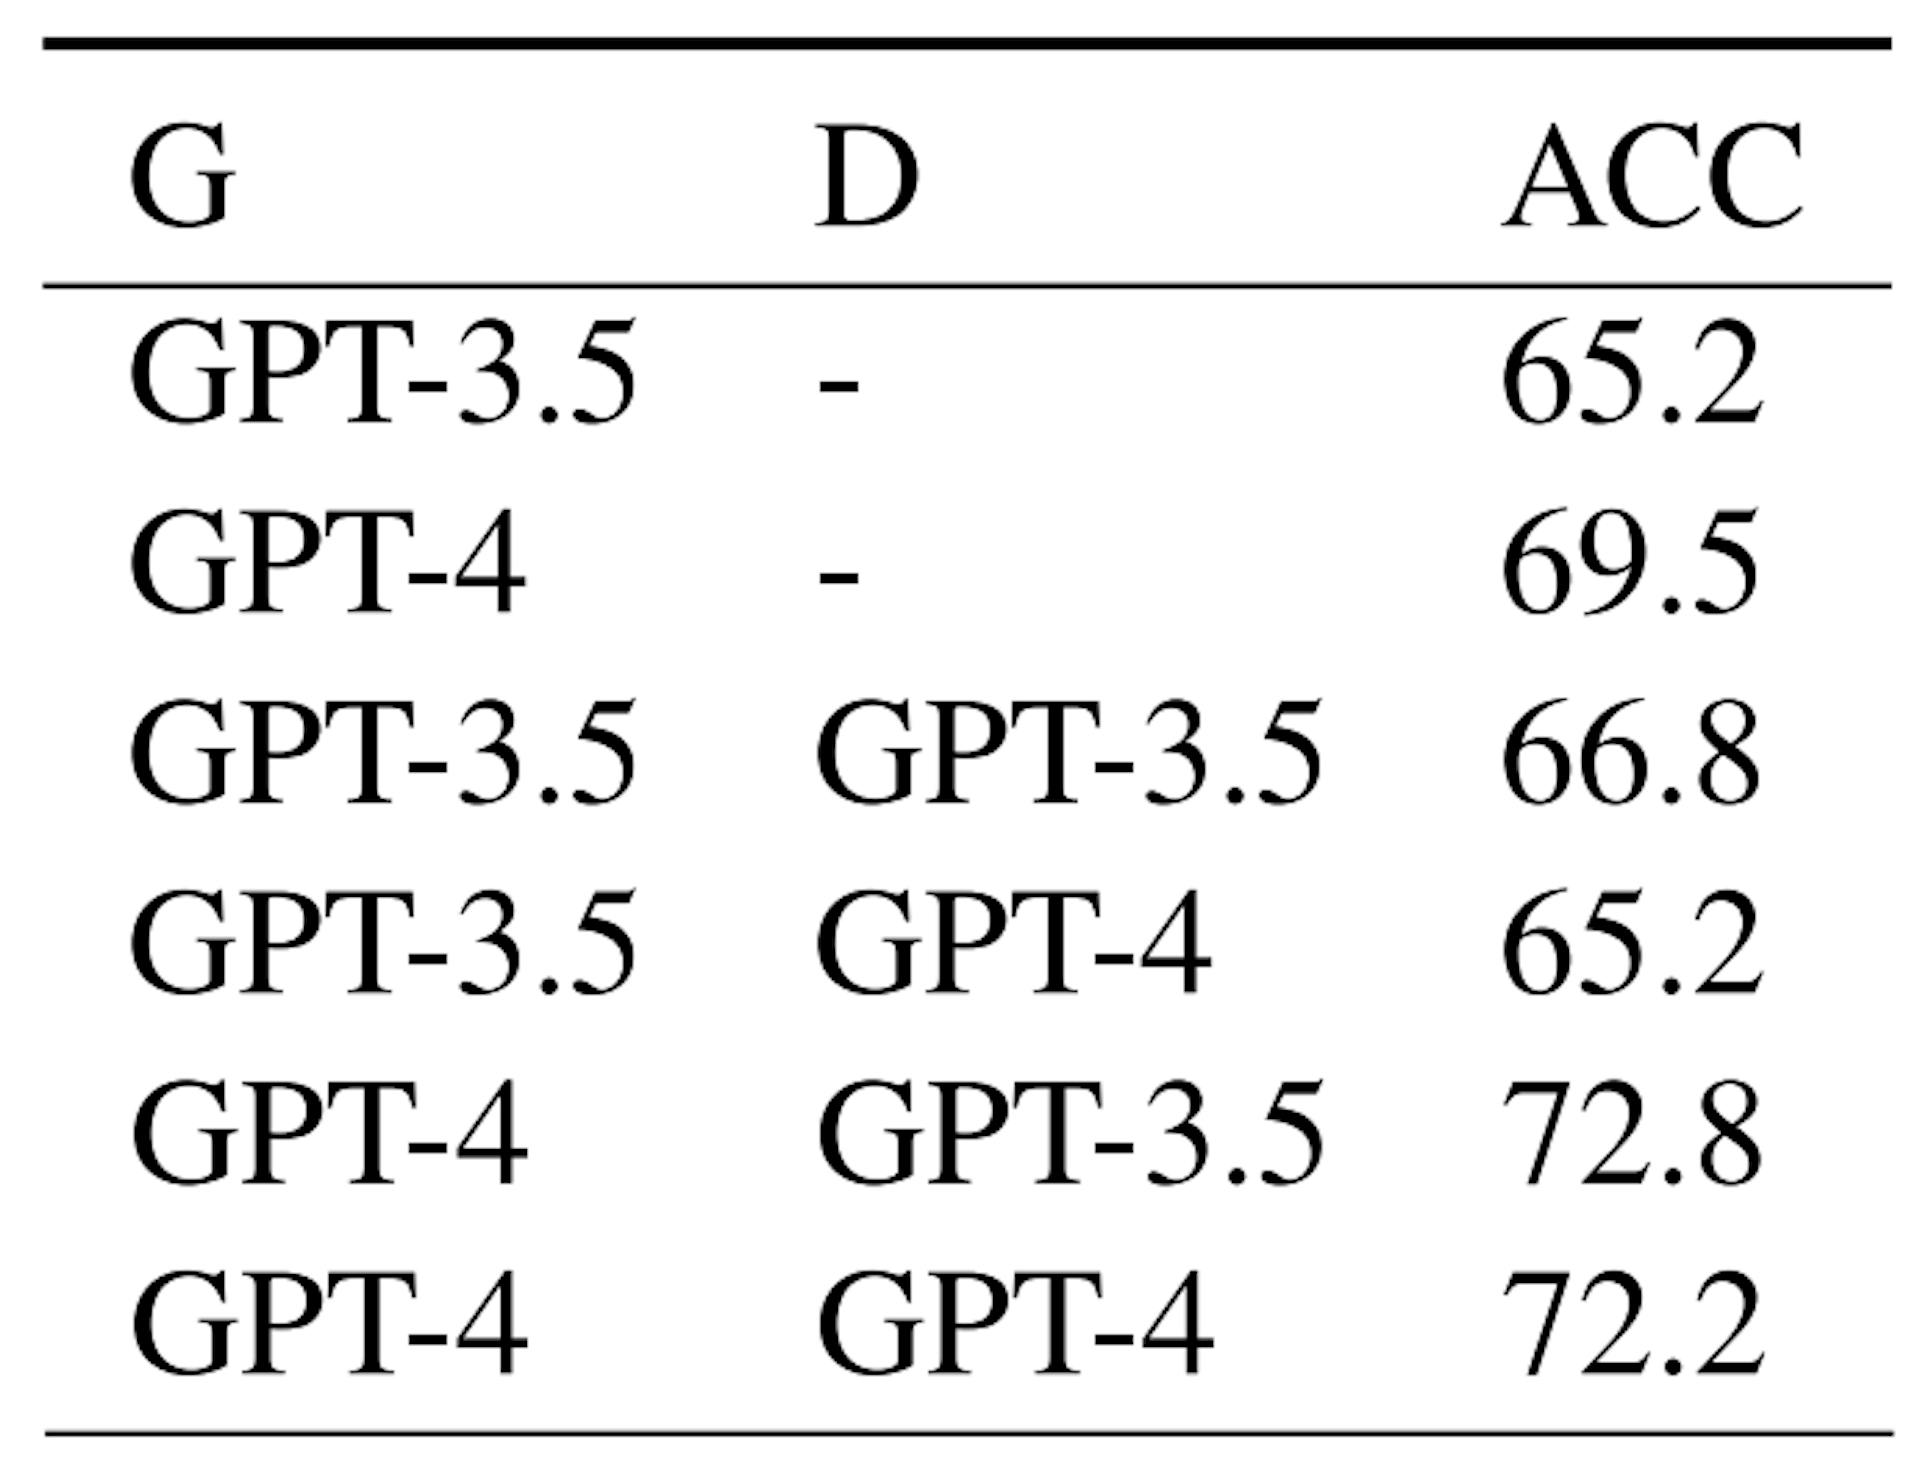 Table 2: Performance on the Twitter dataset with GPT-3.5 and GPT-4 taking different roles. G denotes generator and D denotes discriminator.